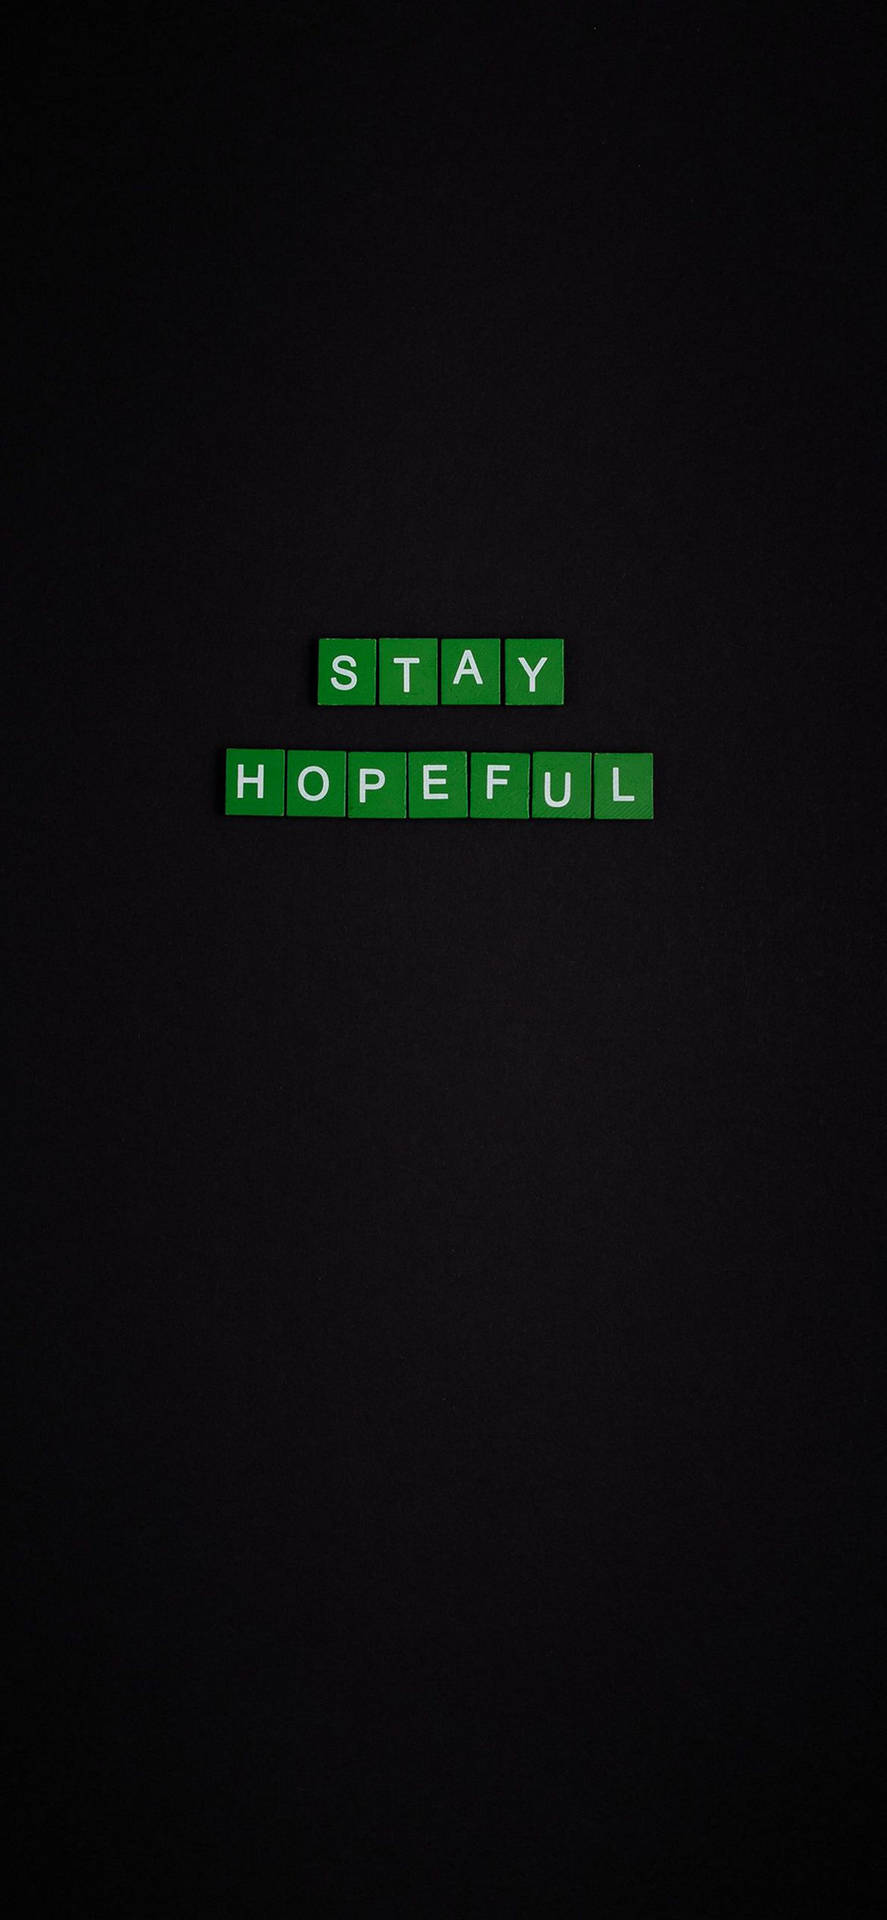 motivational quotes wallpaper iphone 5